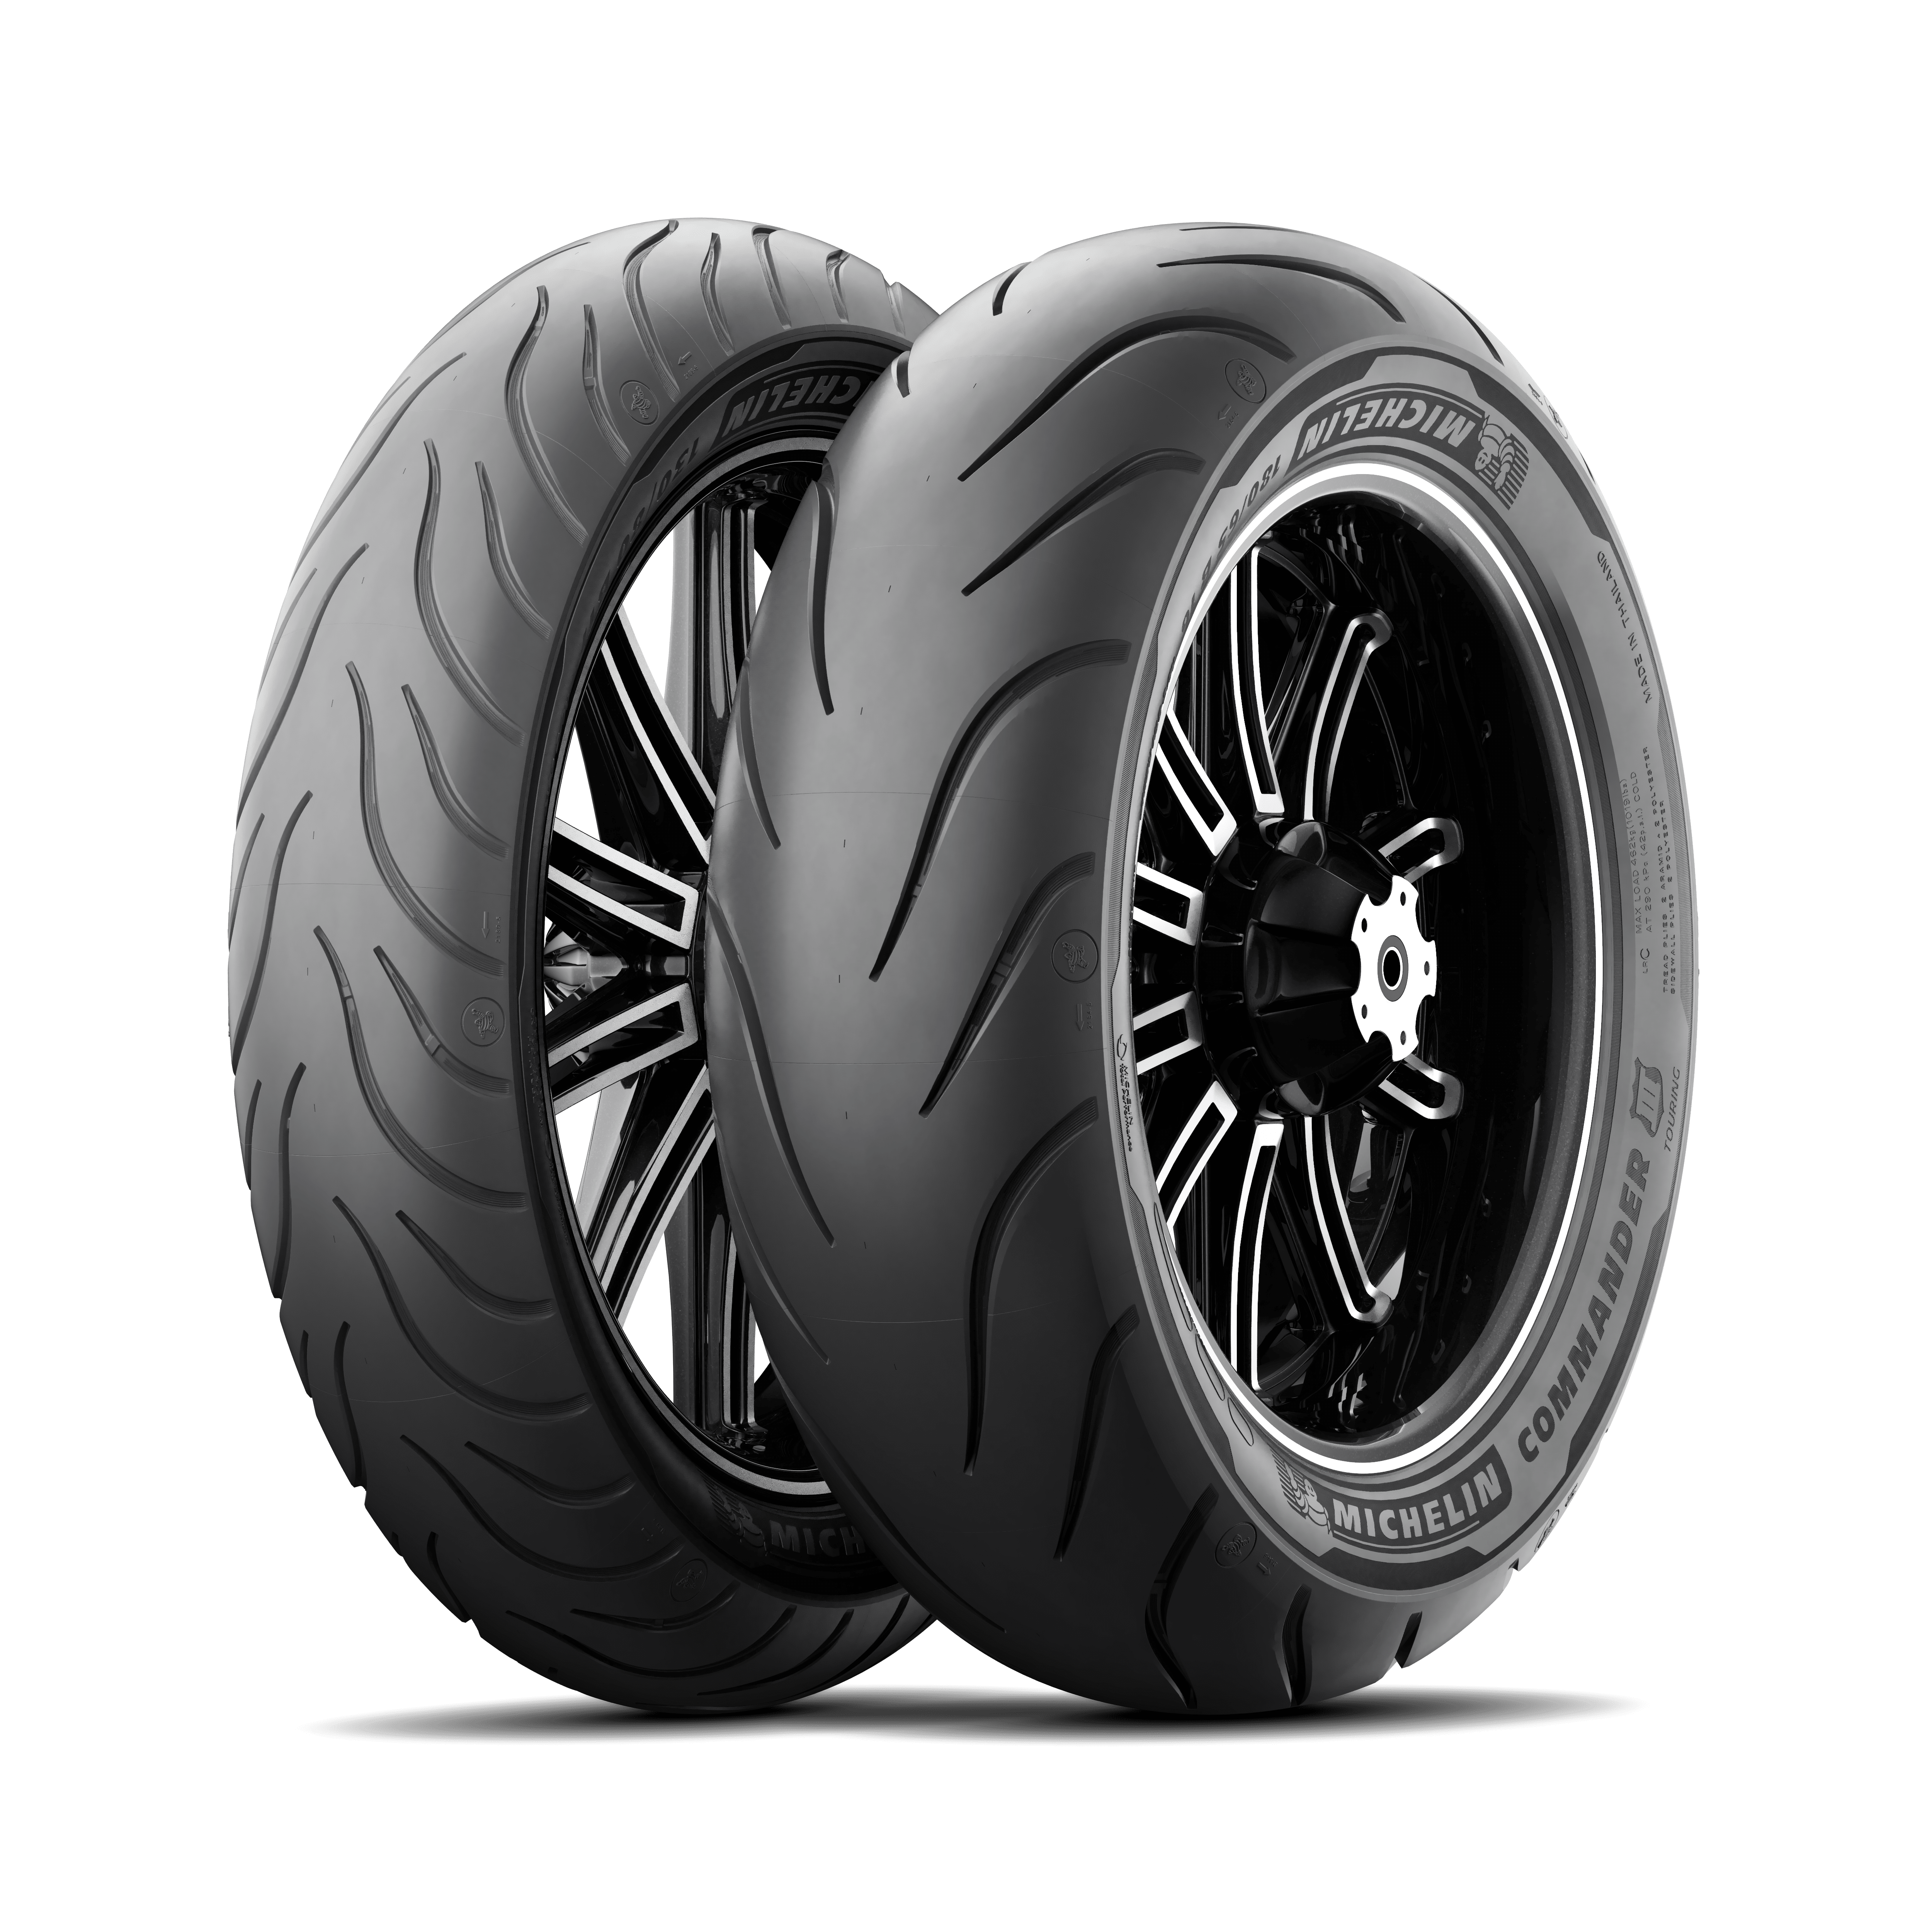 MICHELIN COMMANDER III TOURING - Motorcycle Tire | MICHELIN USA